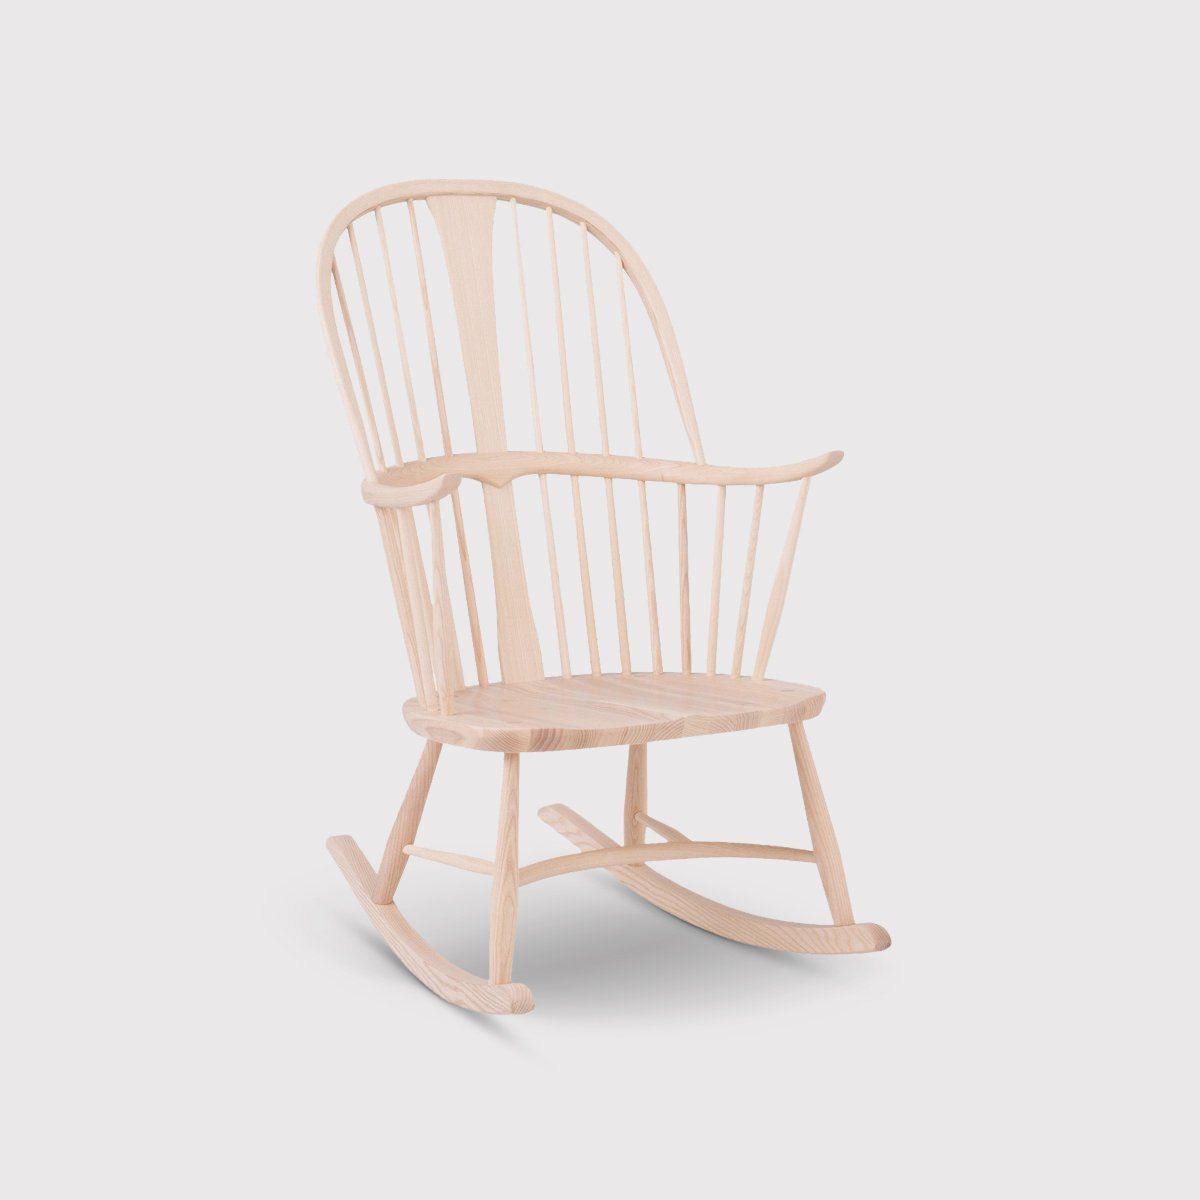 L.Ercolani Chairmakers Rocking Chair, Neutral | Barker & Stonehouse